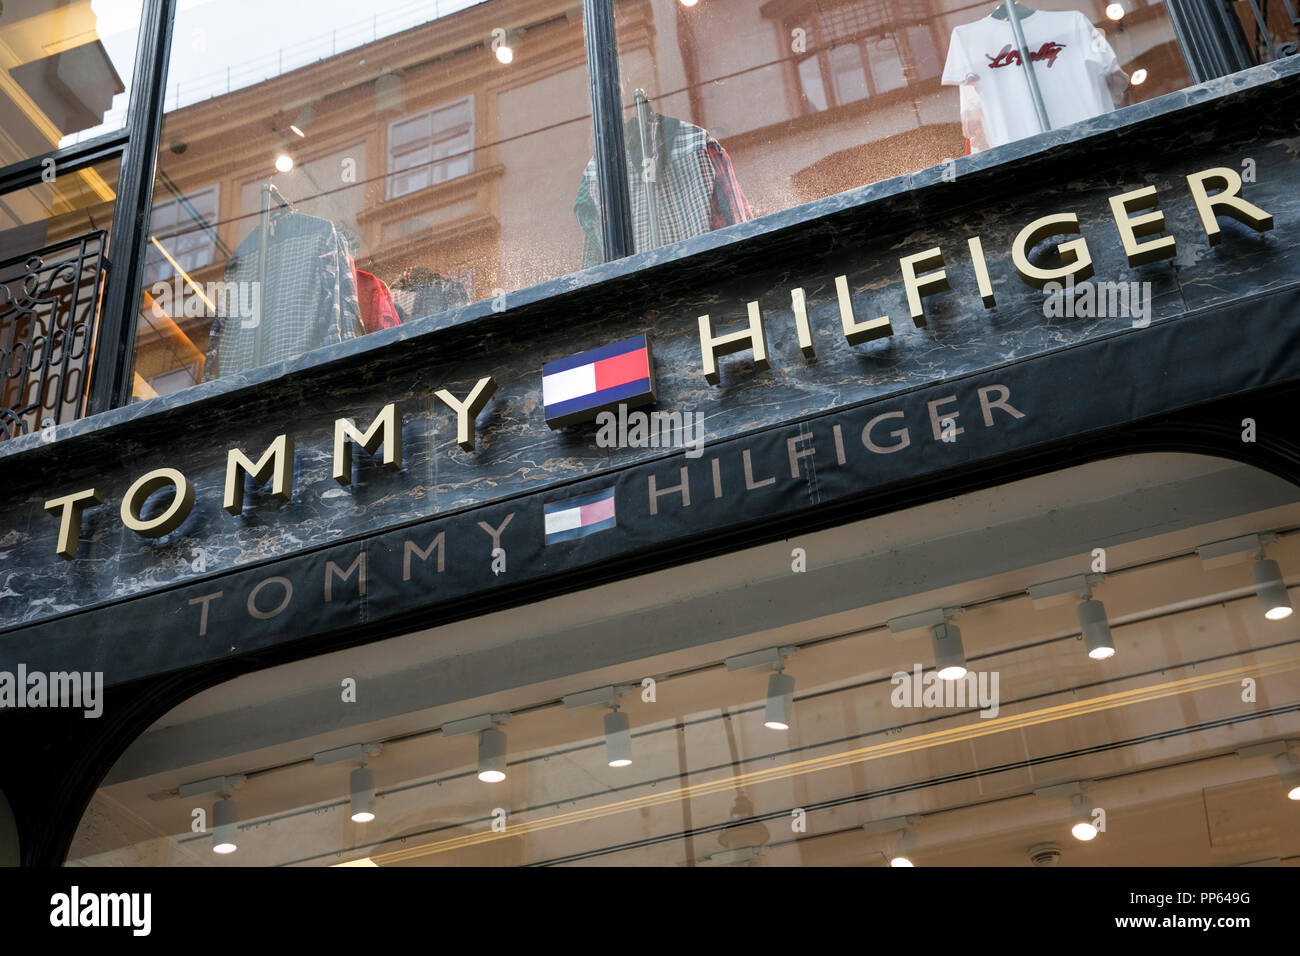 Tommy Hilfiger Logo High Resolution Stock Photography and Images - Alamy